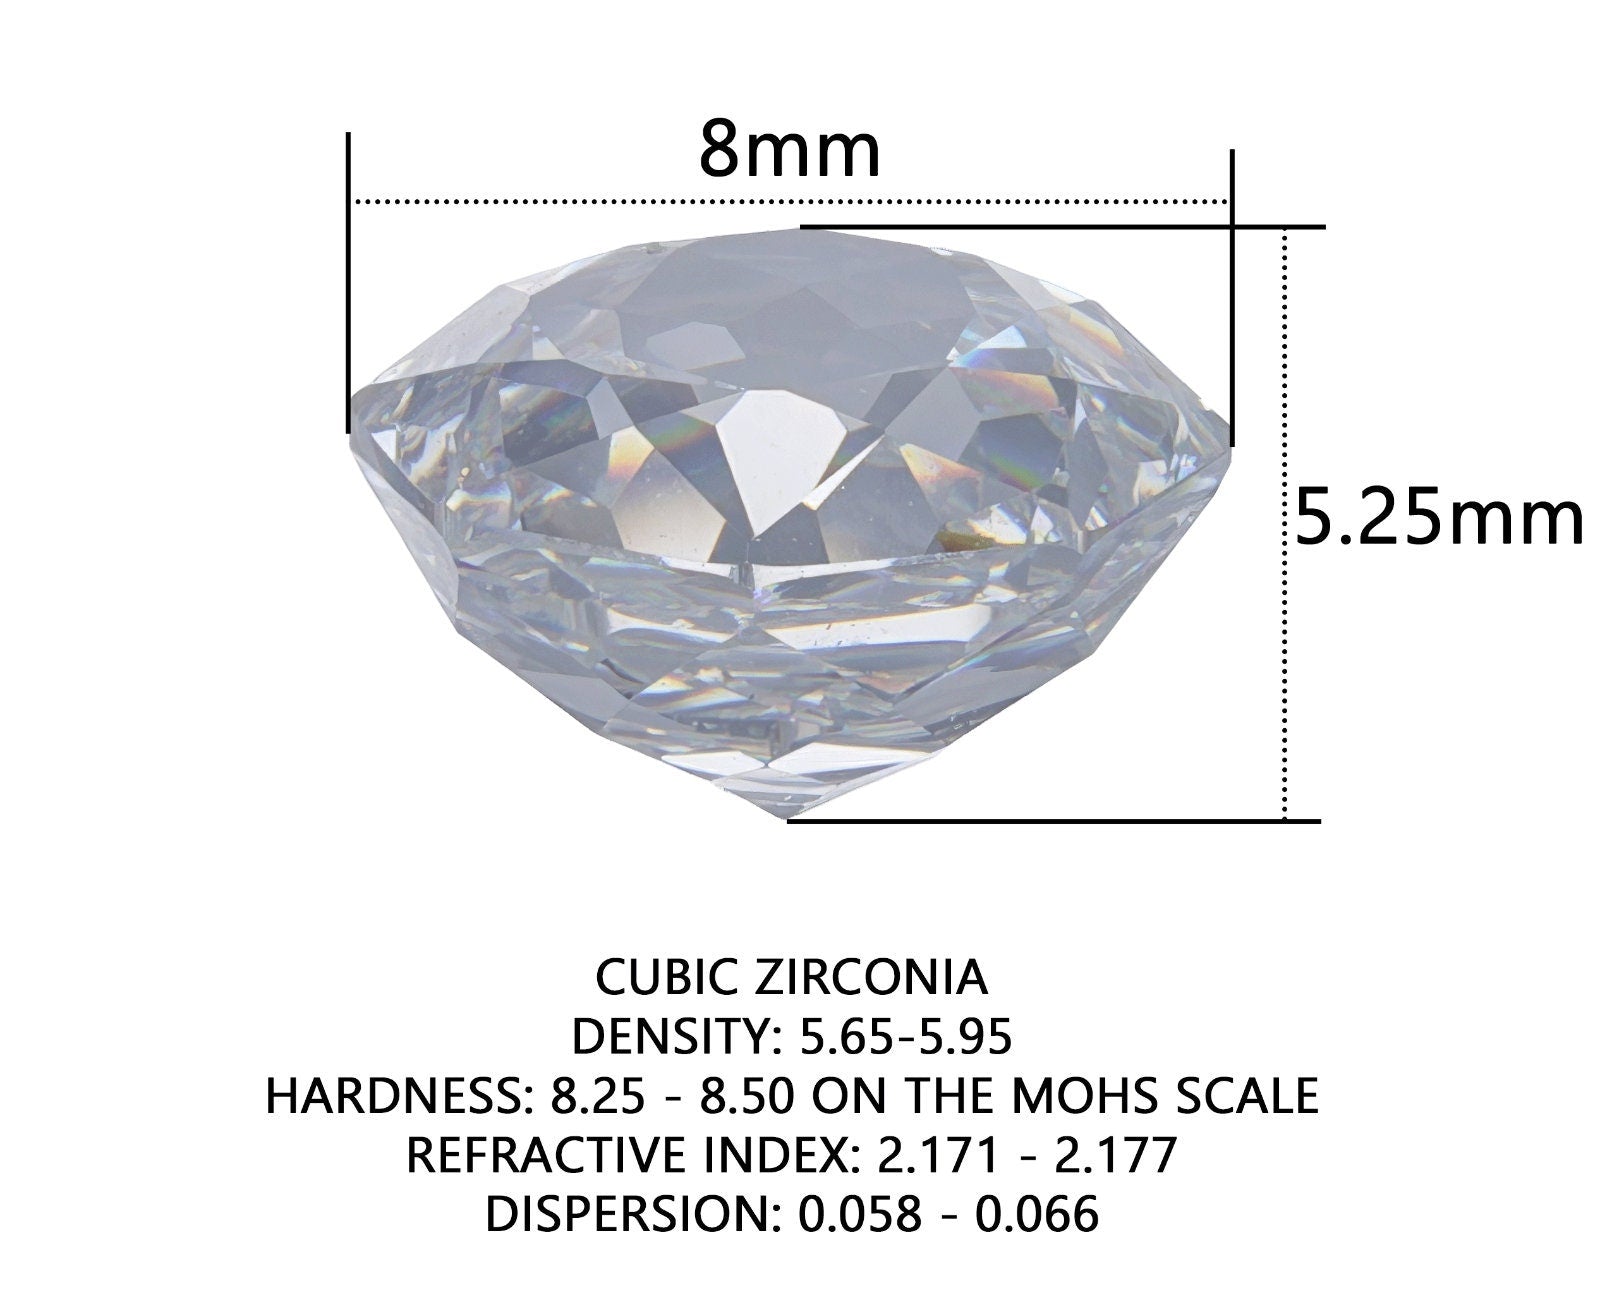 Cubic zirconia 8mm white clear octagon rose cut gemstone – for jewelry making